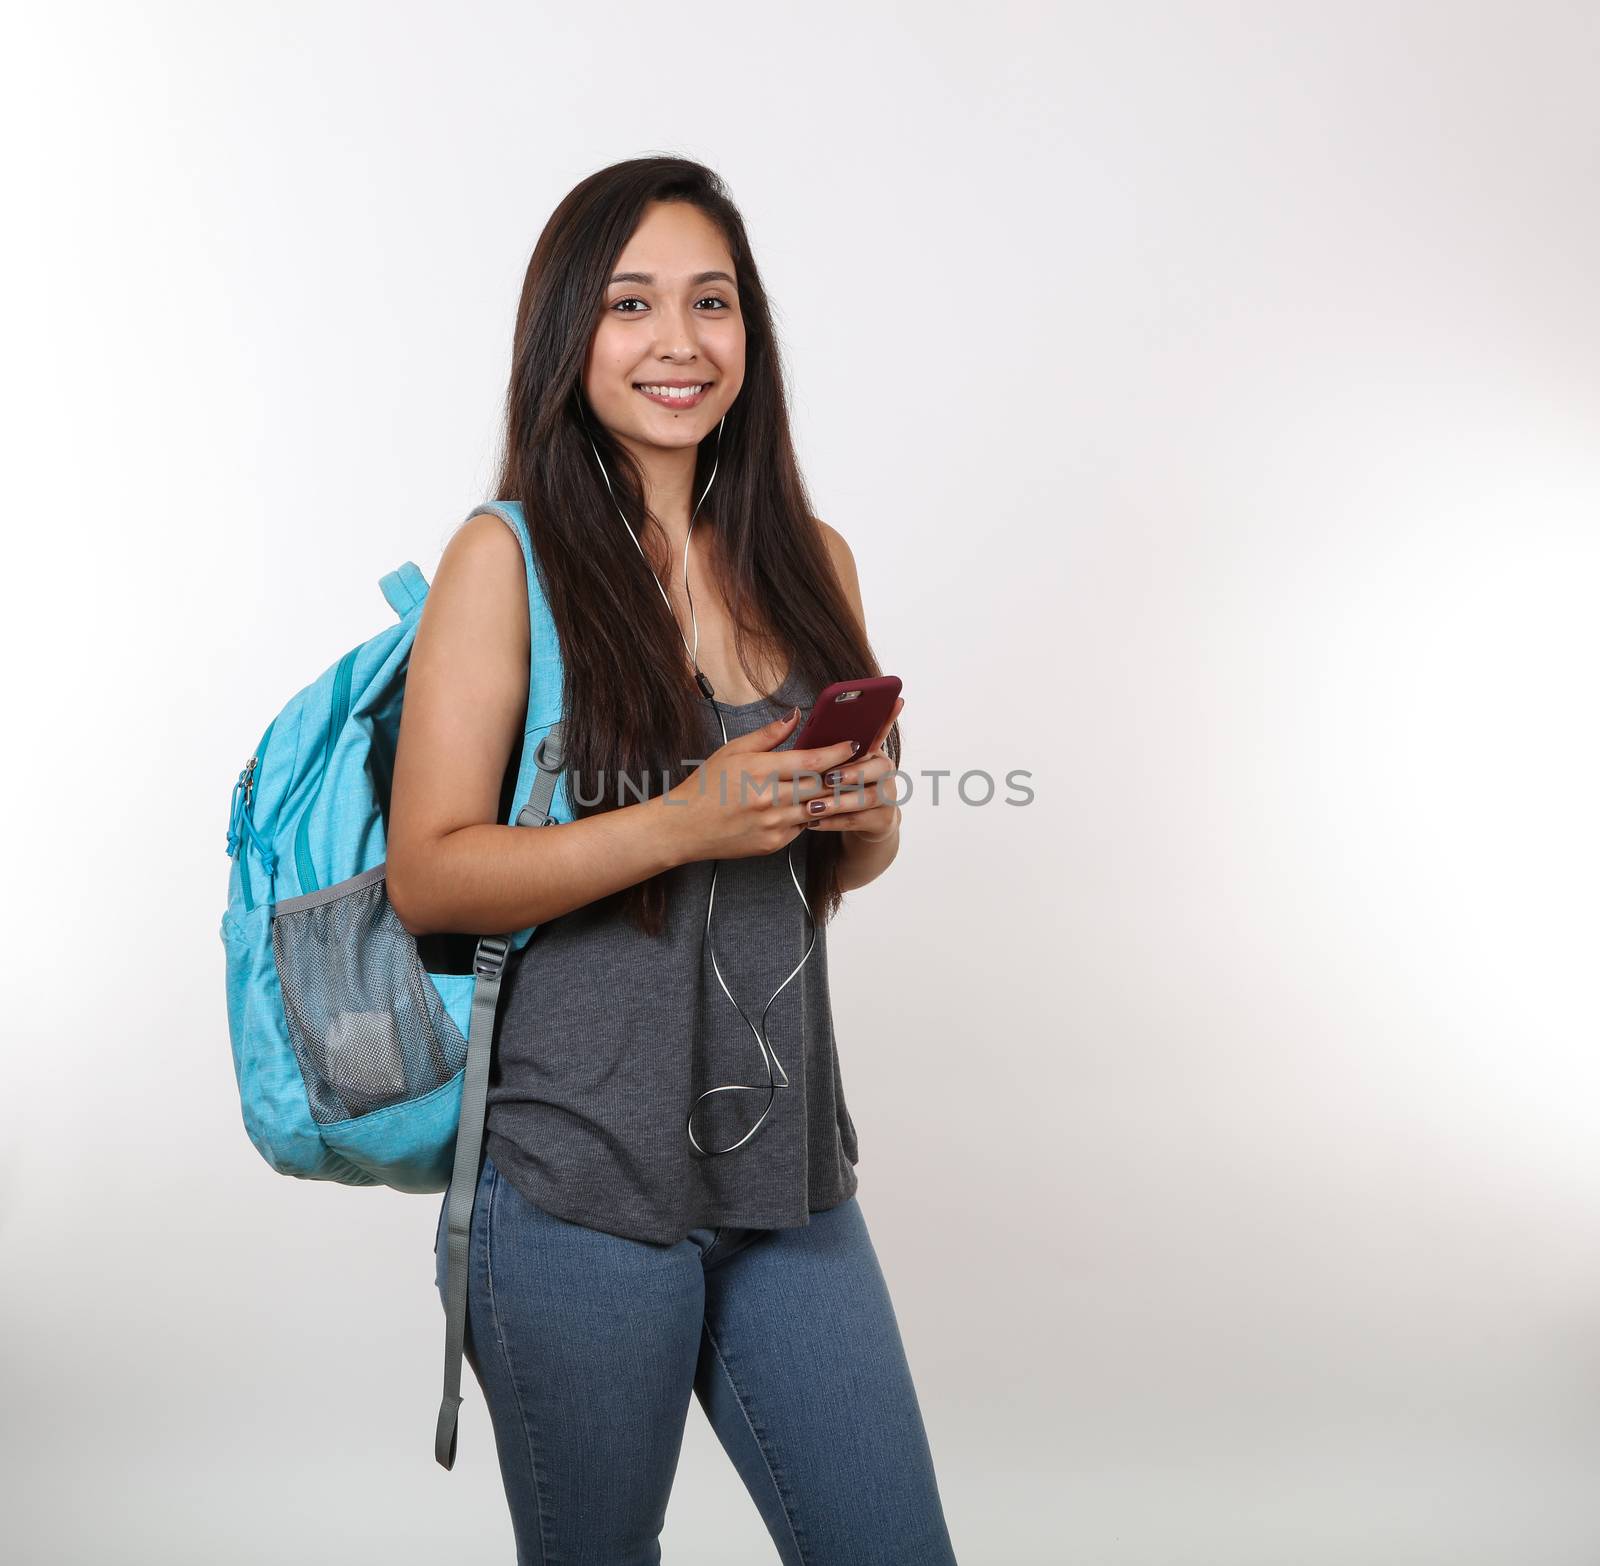 A pretty female student is listening to music on her phone while wearing a backpack.